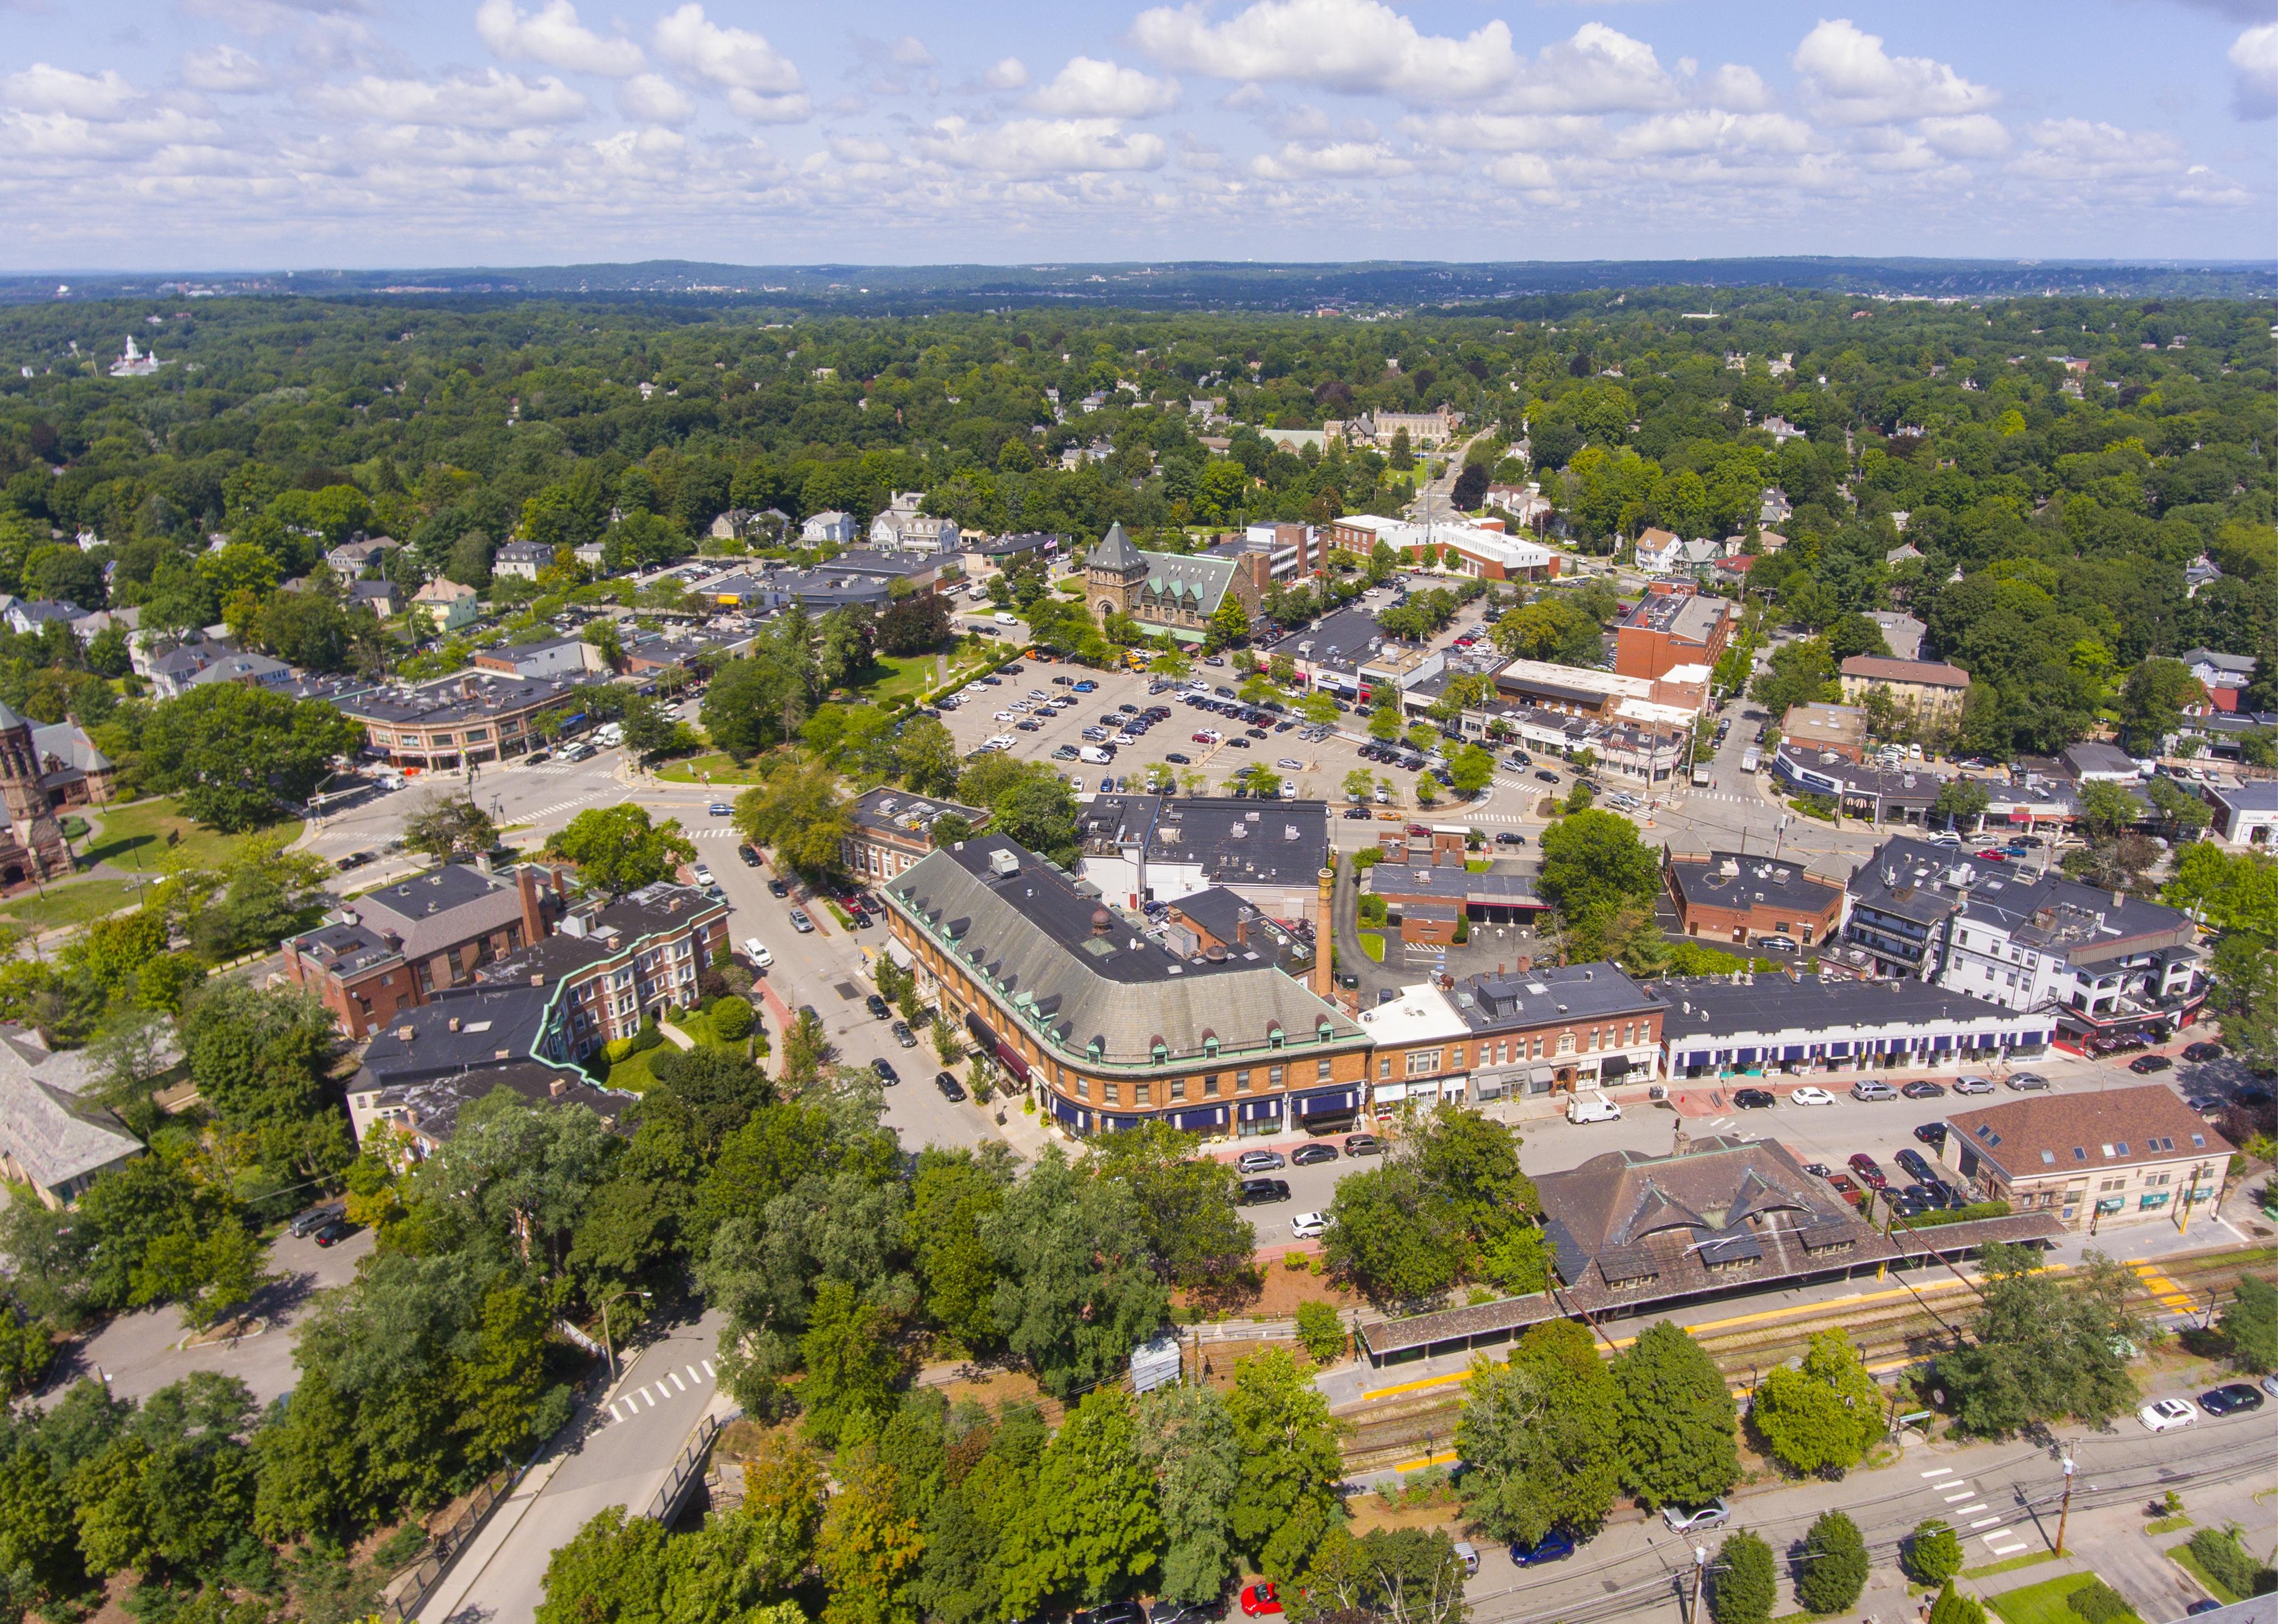 A large shopping center surrounded by trees and homes.